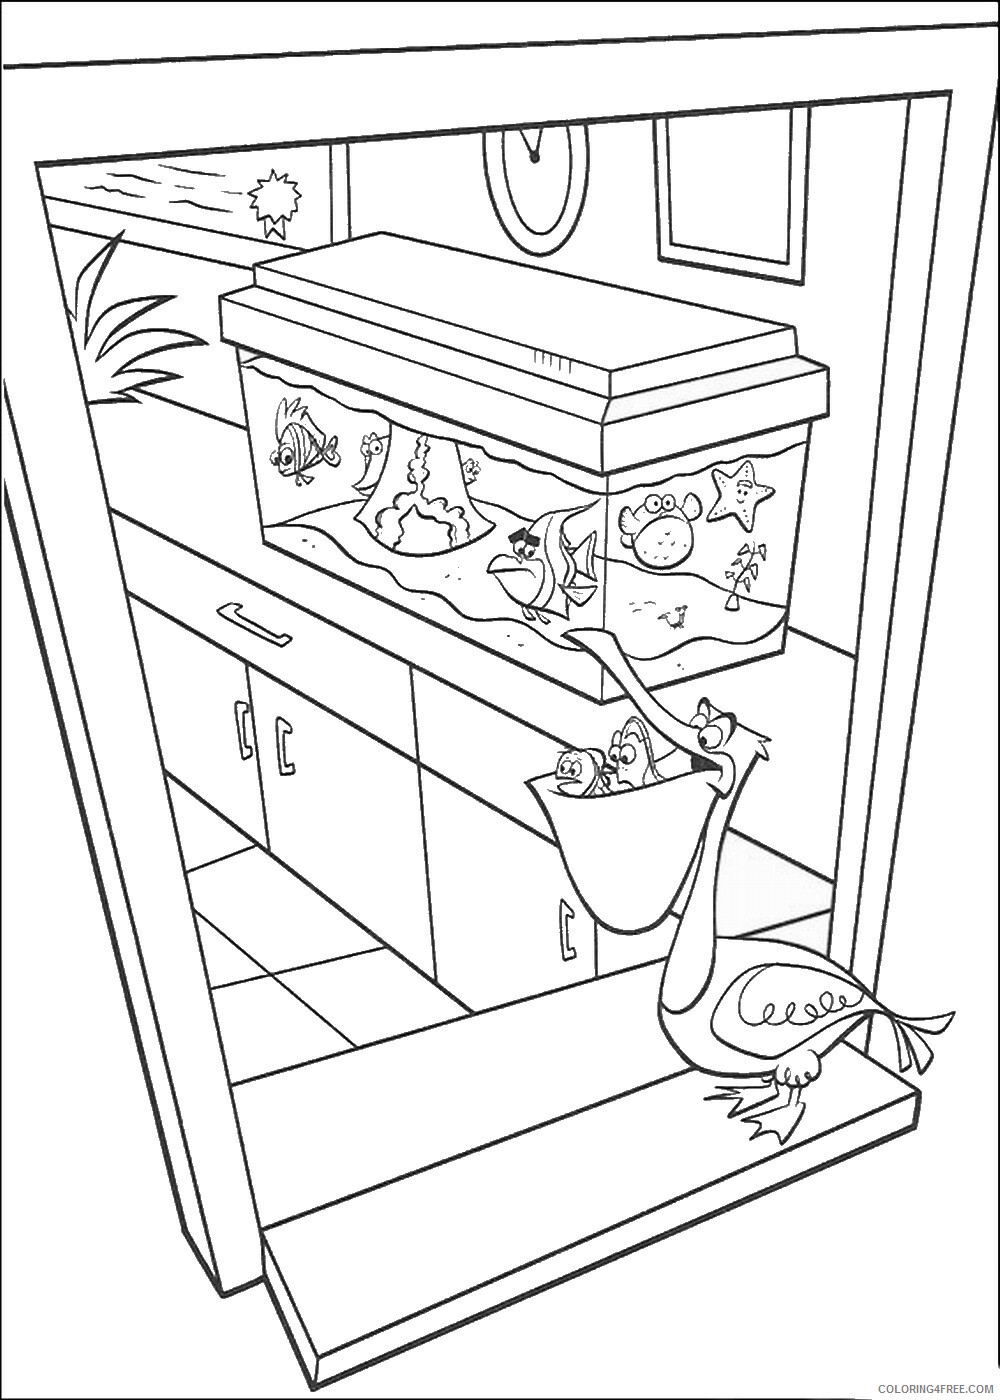 Finding Nemo Coloring Pages TV Film findingnemoc23 Printable 2020 02820 Coloring4free